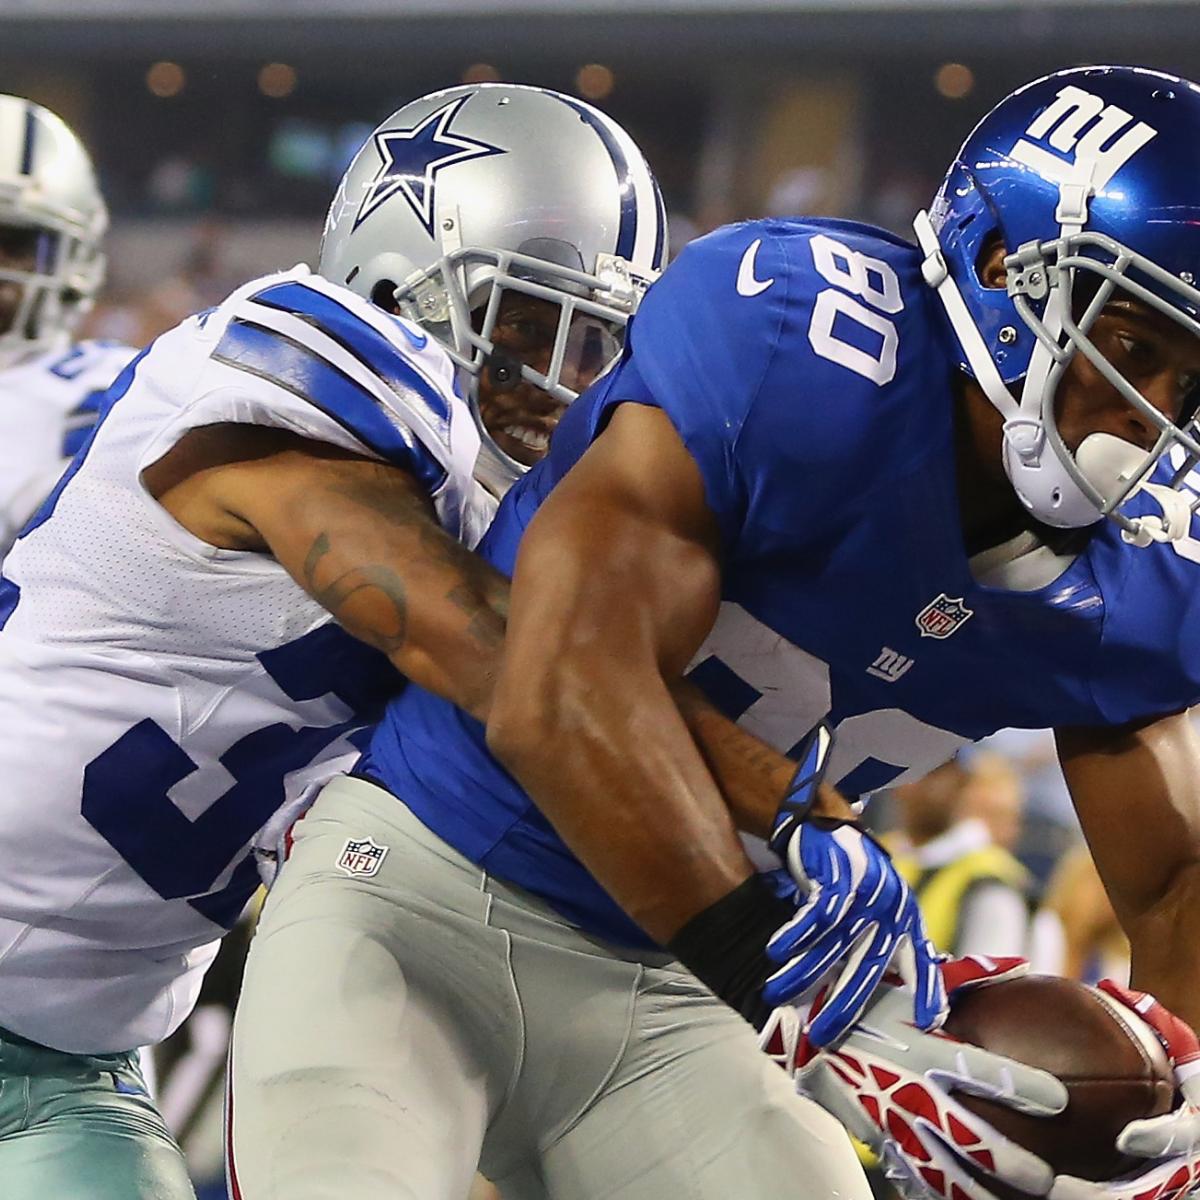 New York Giants Vs. Dallas Cowboys Live Play By Play And Reactions